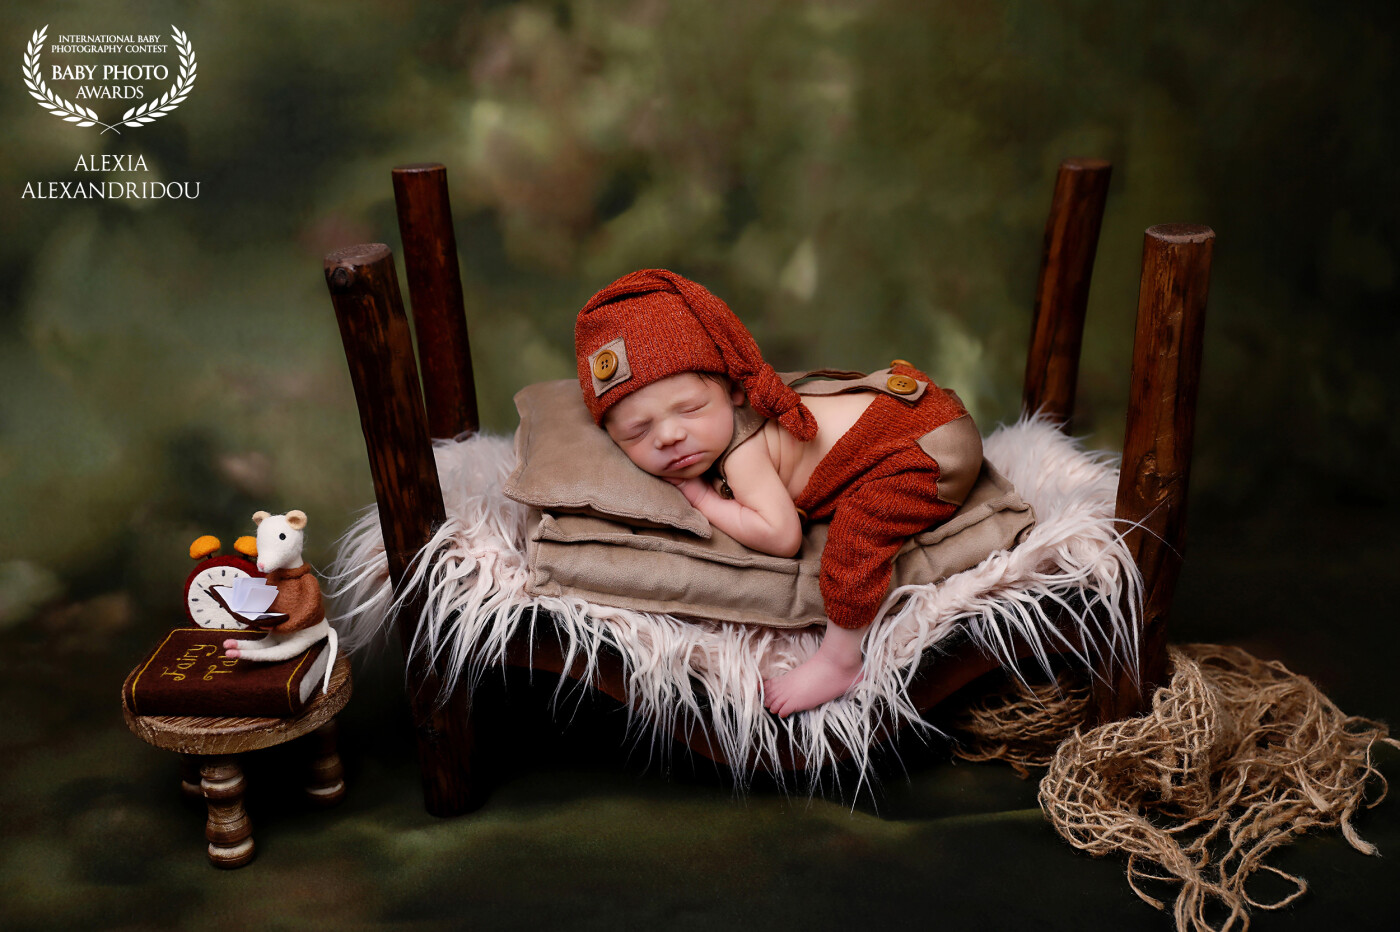 this little guy is one of the smallest babies I've ever photographed. the parents wanted a simple photo shoot and so I created this simple scene where the little one fit perfectly. Doesn't he remind you of a scandalous peter pan who is ready ,when he wakes up, to fly to his neverland?